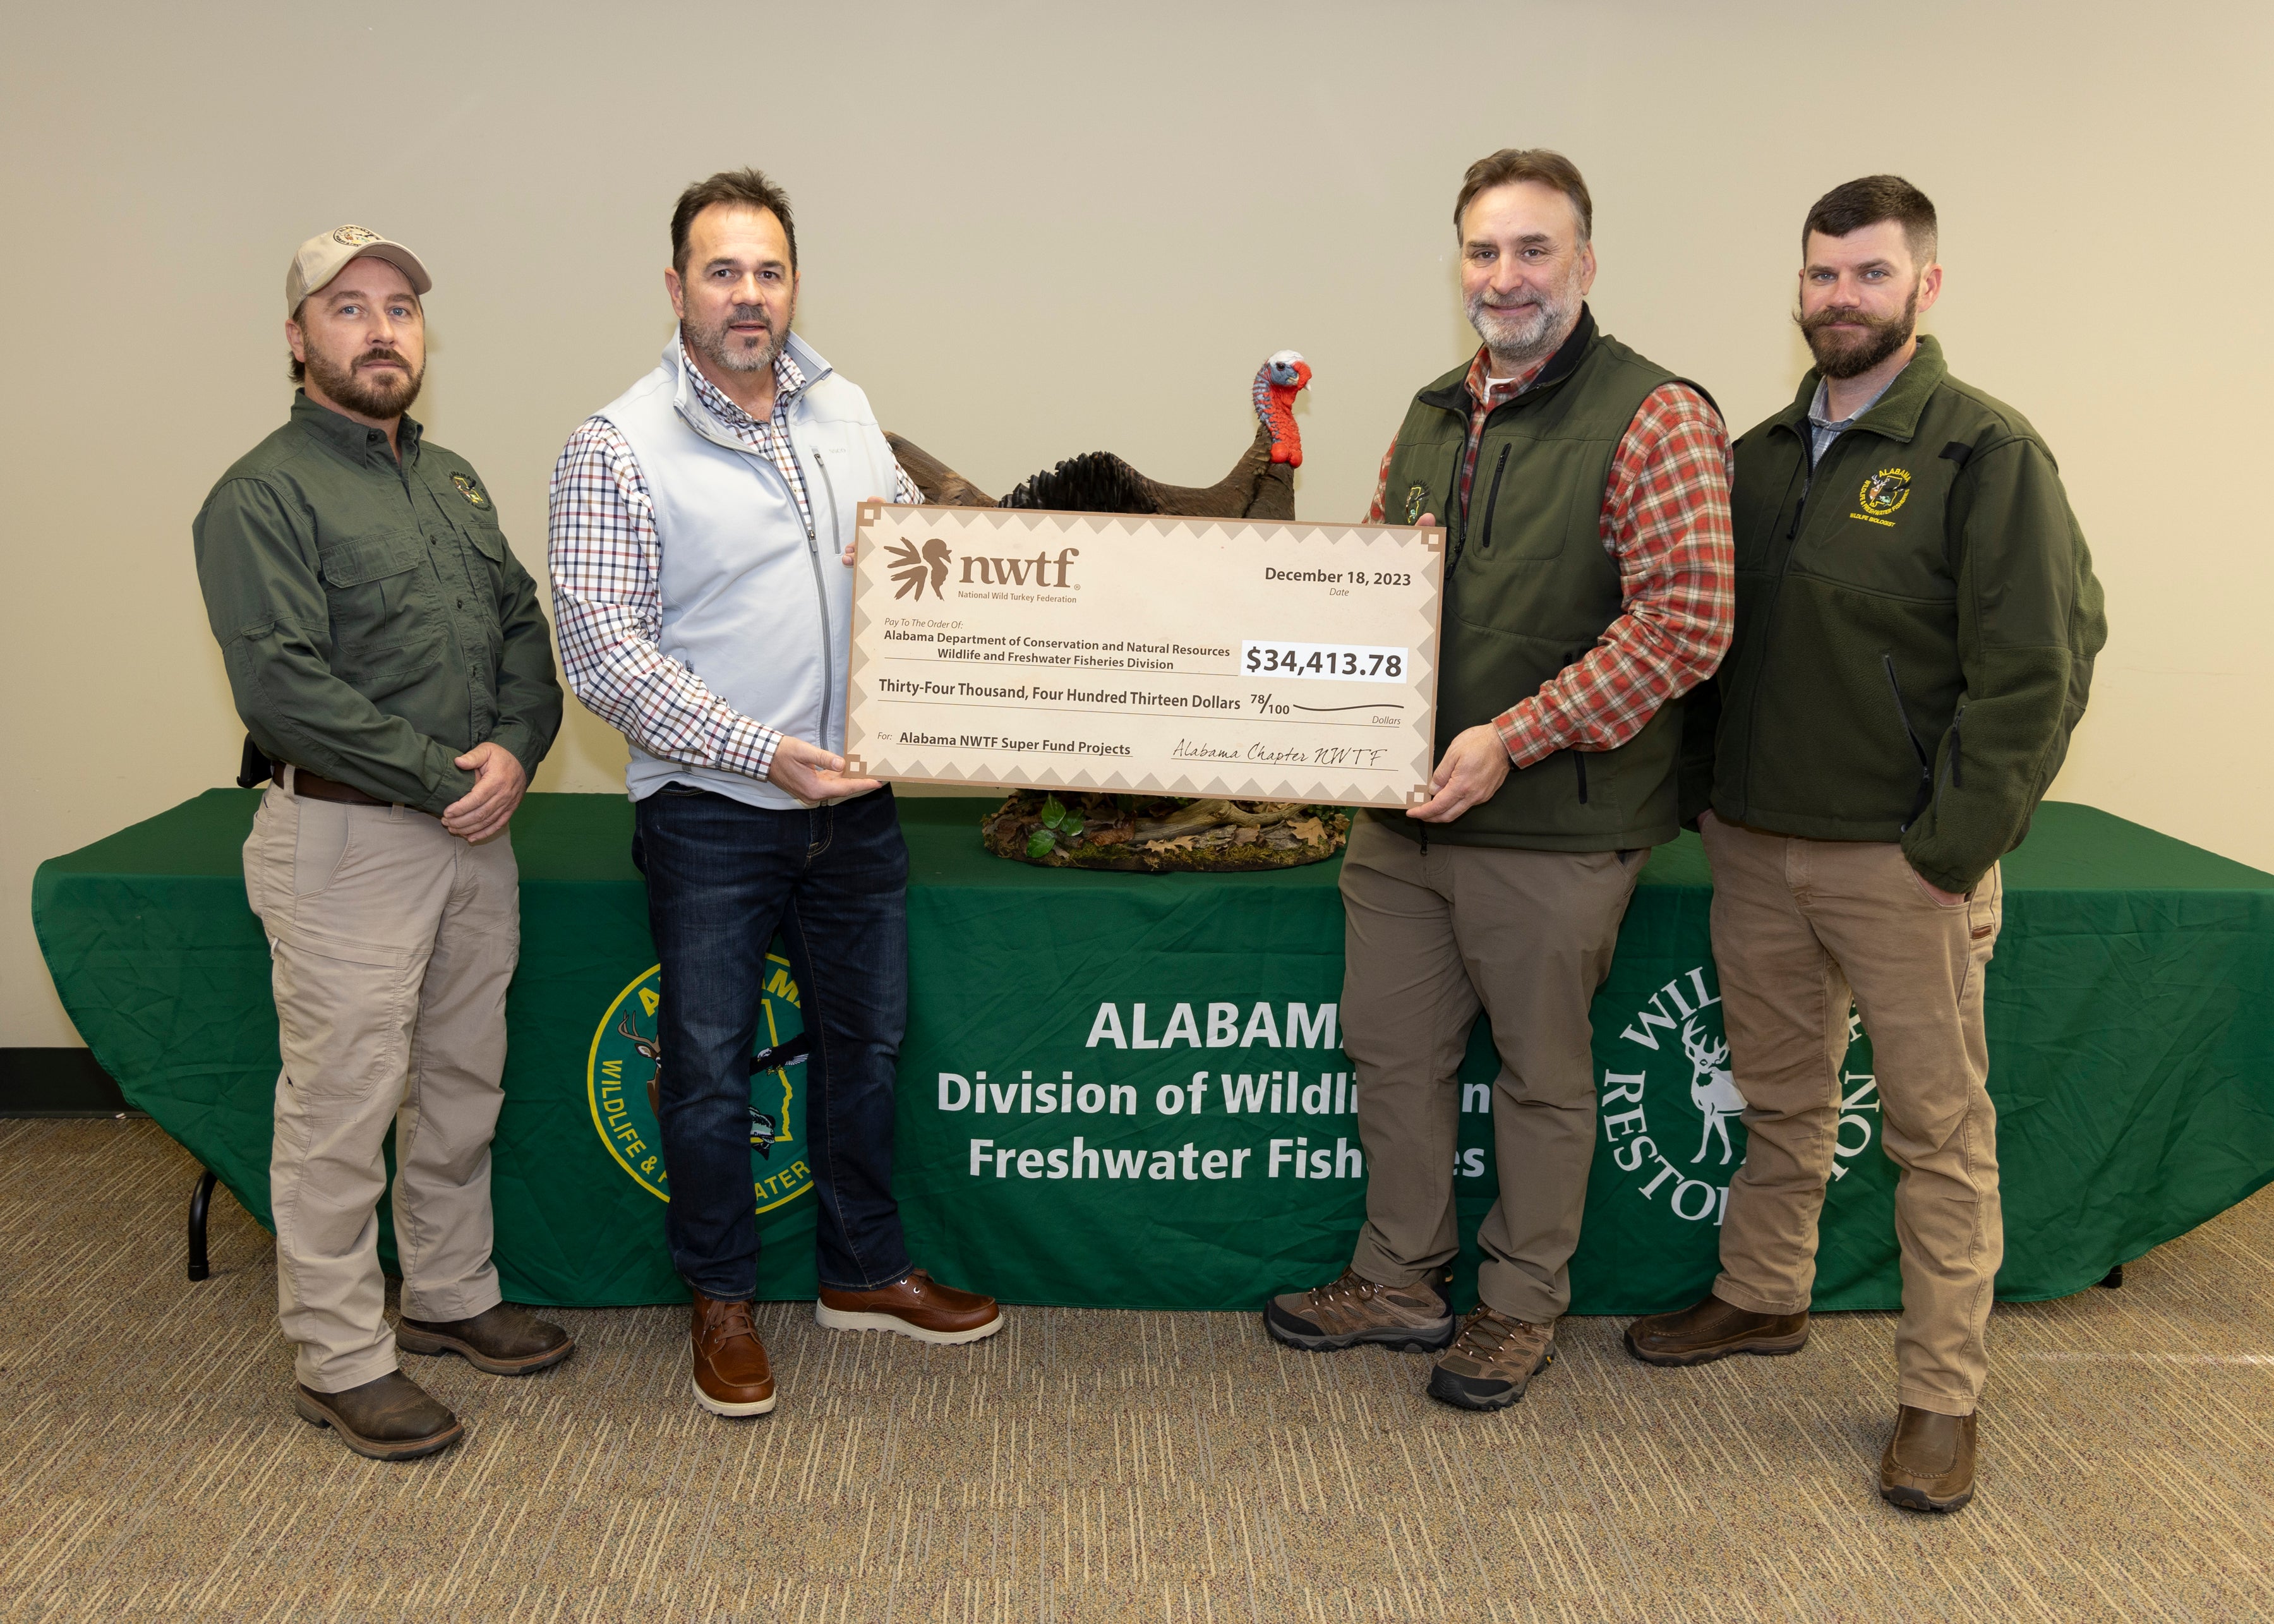 Photo L-R: Steven Mitchell, Supervising Wildlife Biologist; Scott Brandon, NWTF Chapter President; Chuck Sykes, Director, Wildlife and Freshwater Fisheries; Seth Madox, Assistant Chief, Wildlife Section